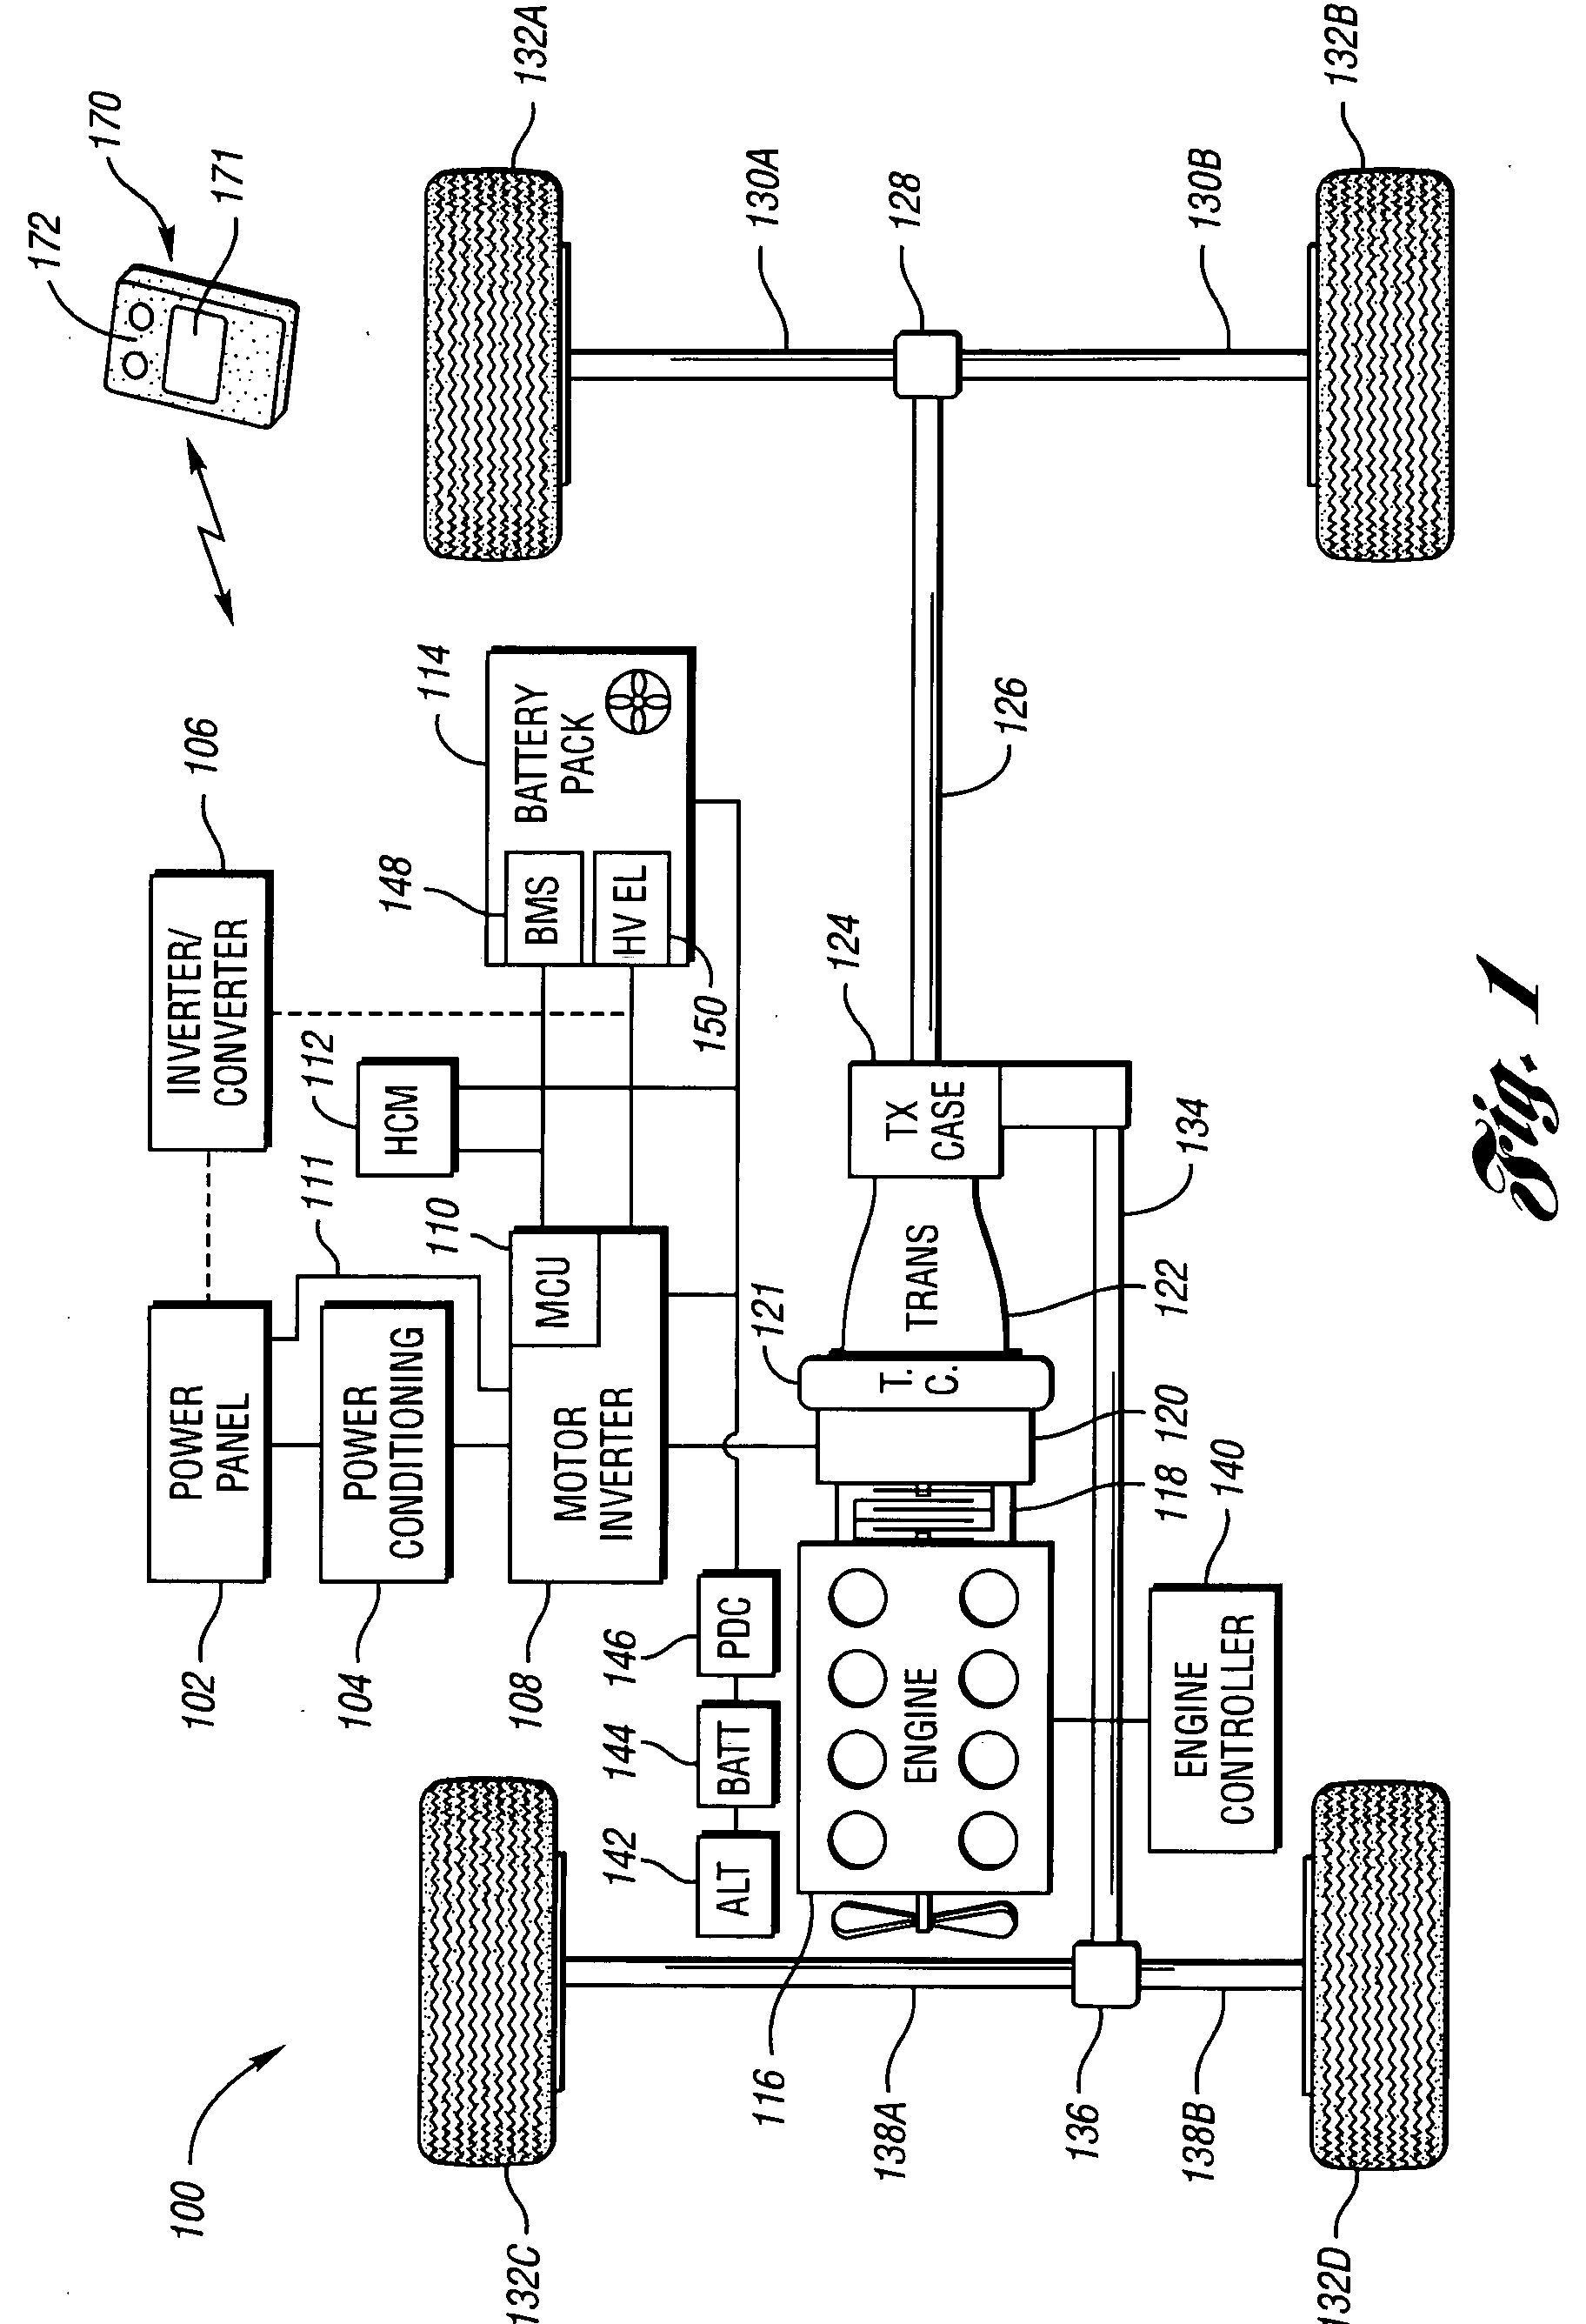 Hybrid vehicle with integral generator for auxiliary loads